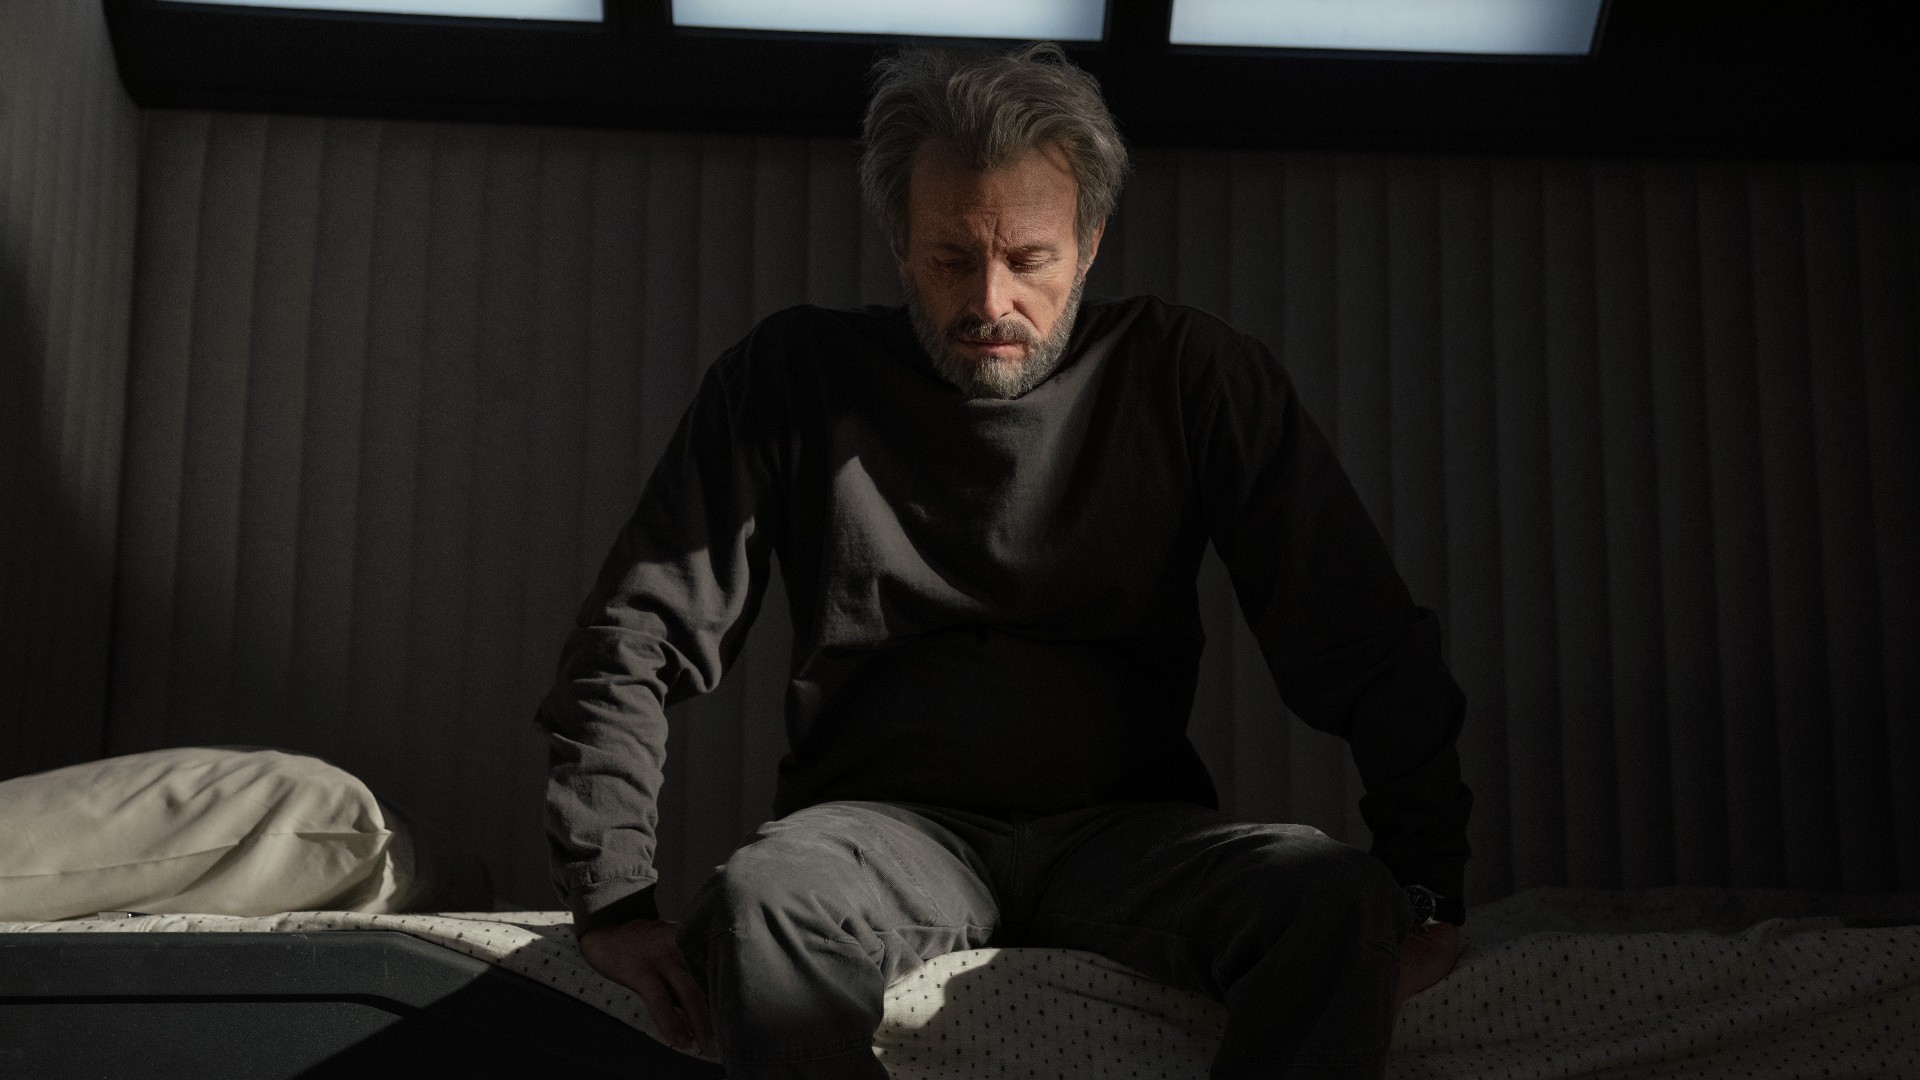 In a very plain, gray room there is a worried older man sitting on a white bed looking down. He has dishevelled short, gray hair, as well as a gray beard and moustache. He is wearing a dark gray long-sleeved shirt and trousers.